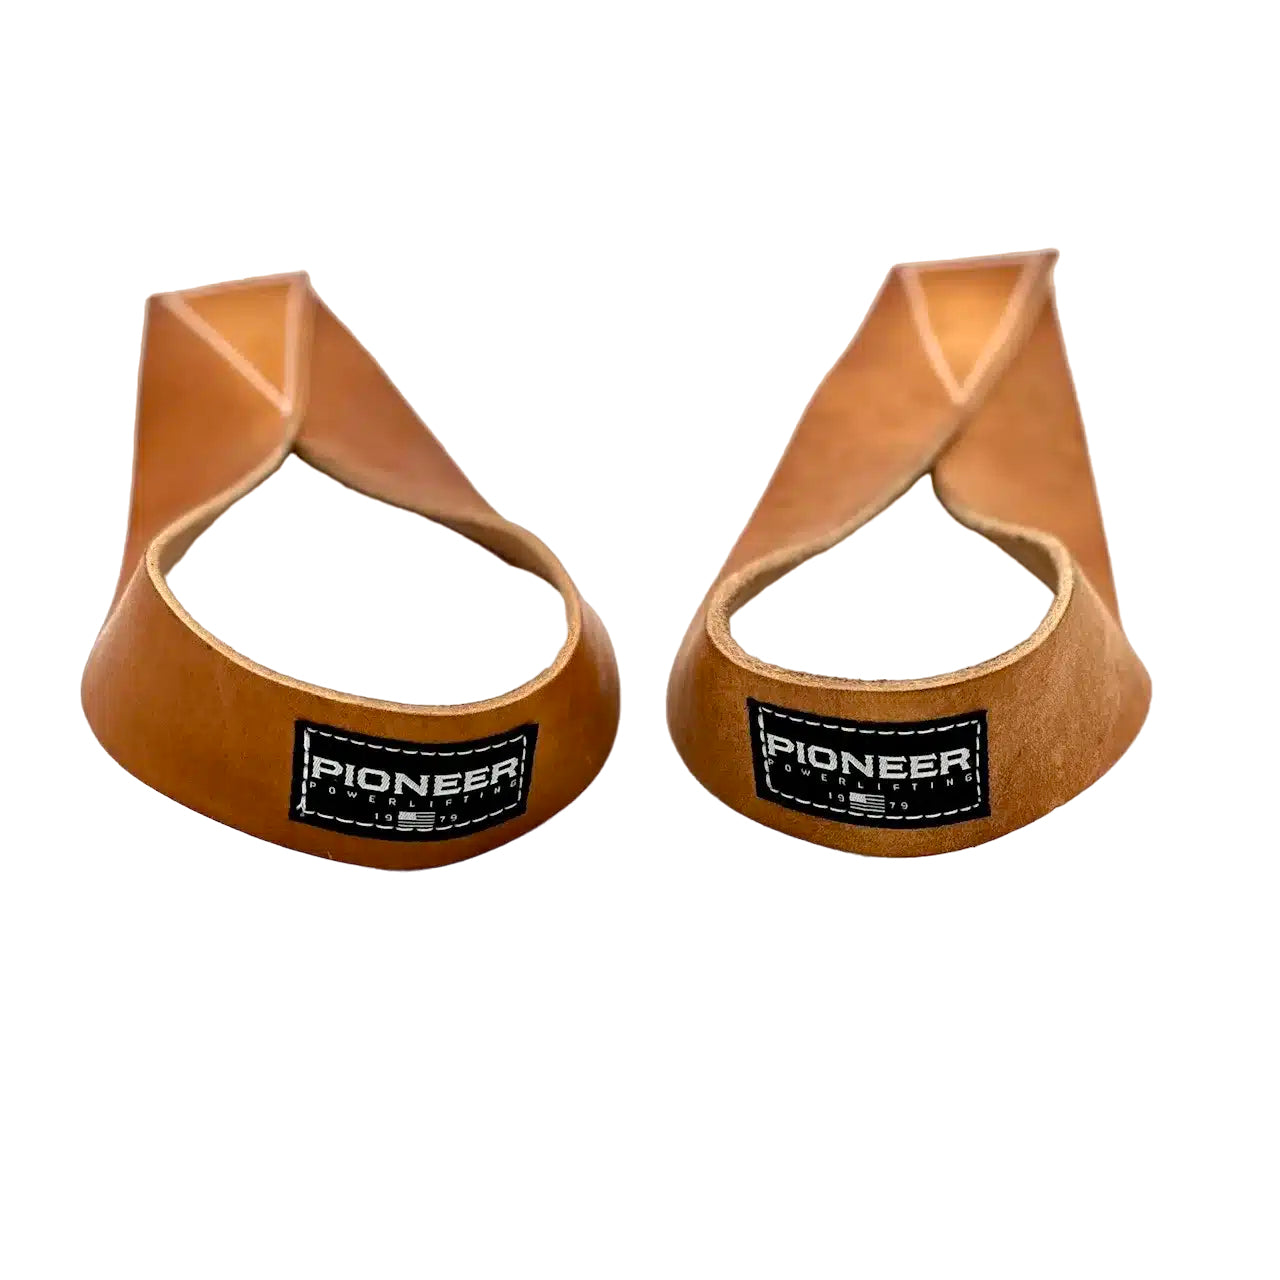 Pioneer Fitness Treated Leather Single Closed Loop / Olympic Lifting Straps